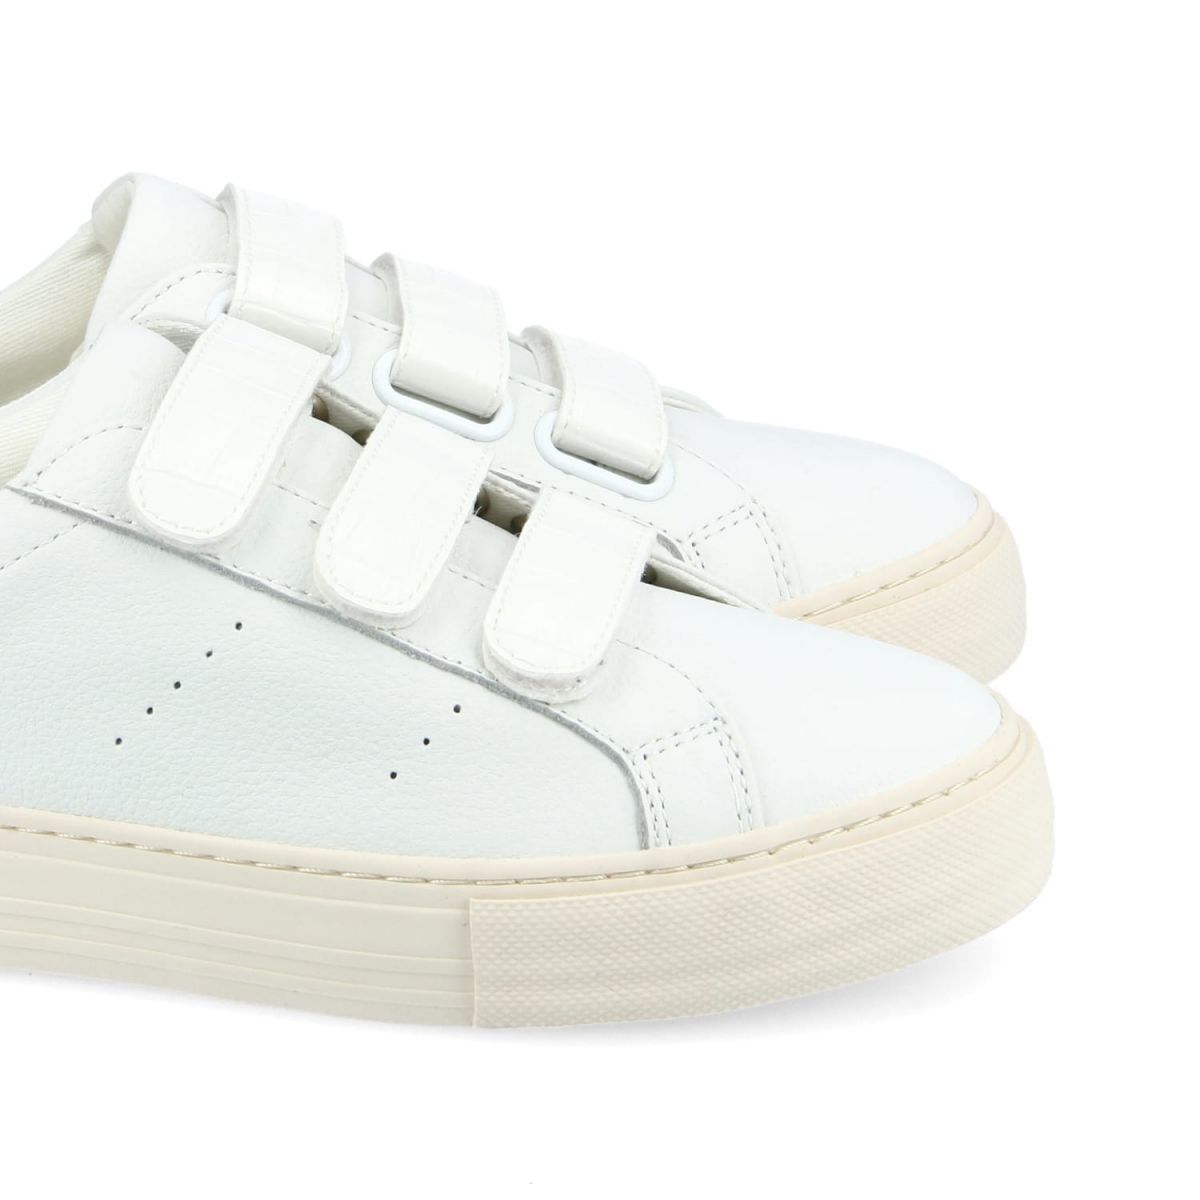 Arcade Straps White Menthe Sneakers KNGDRG042U - 4